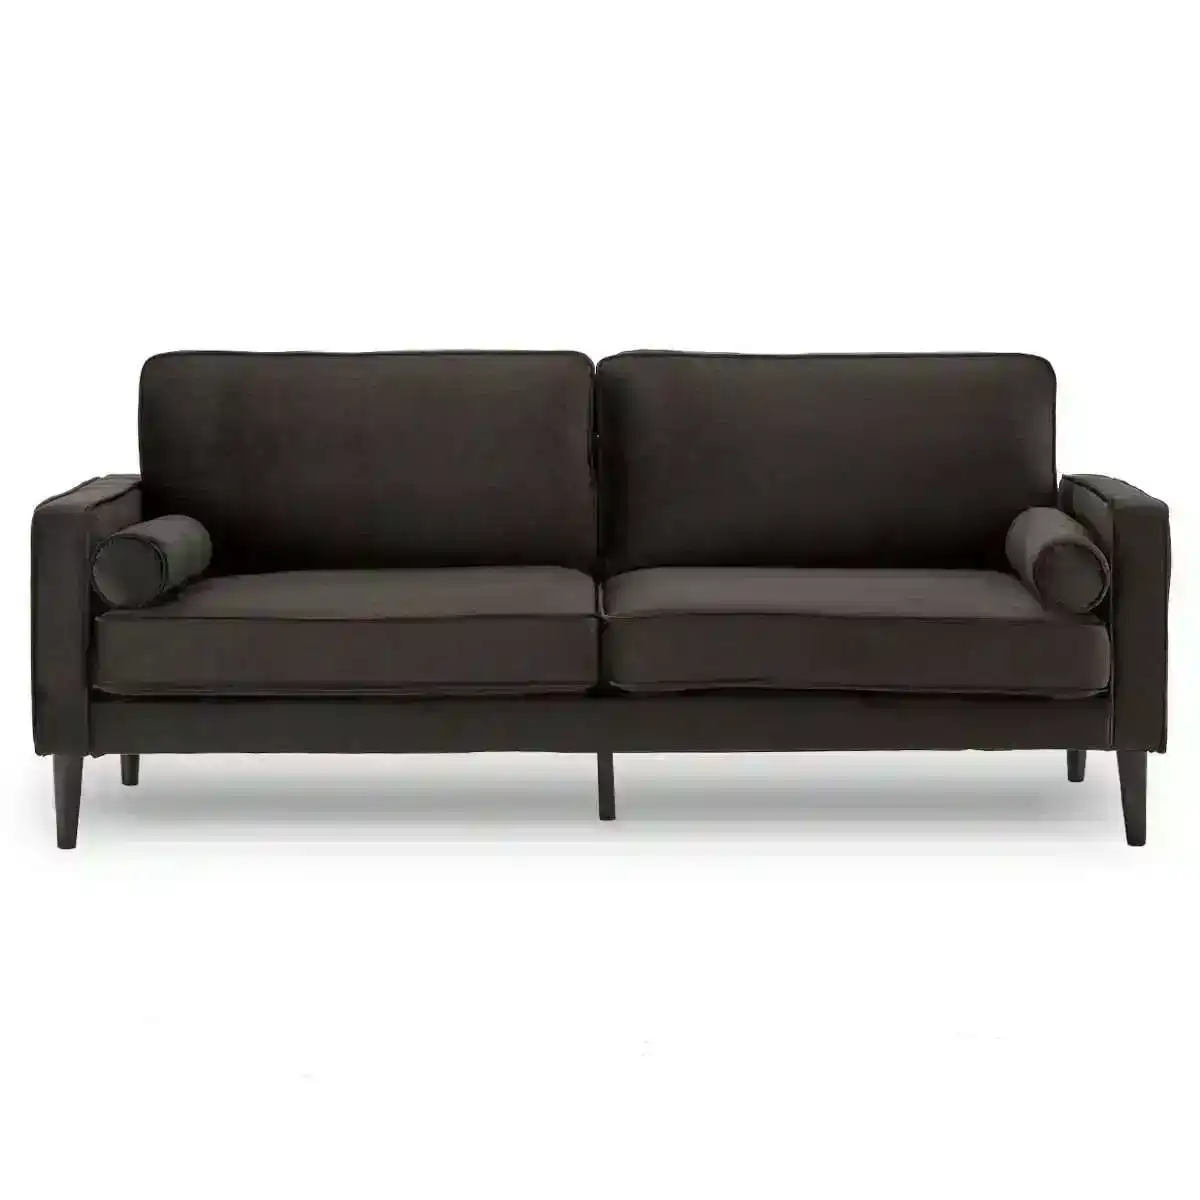 Sarantino 3 Seater Faux Velvet Sofa Bed Couch Furniture Lounge   Black